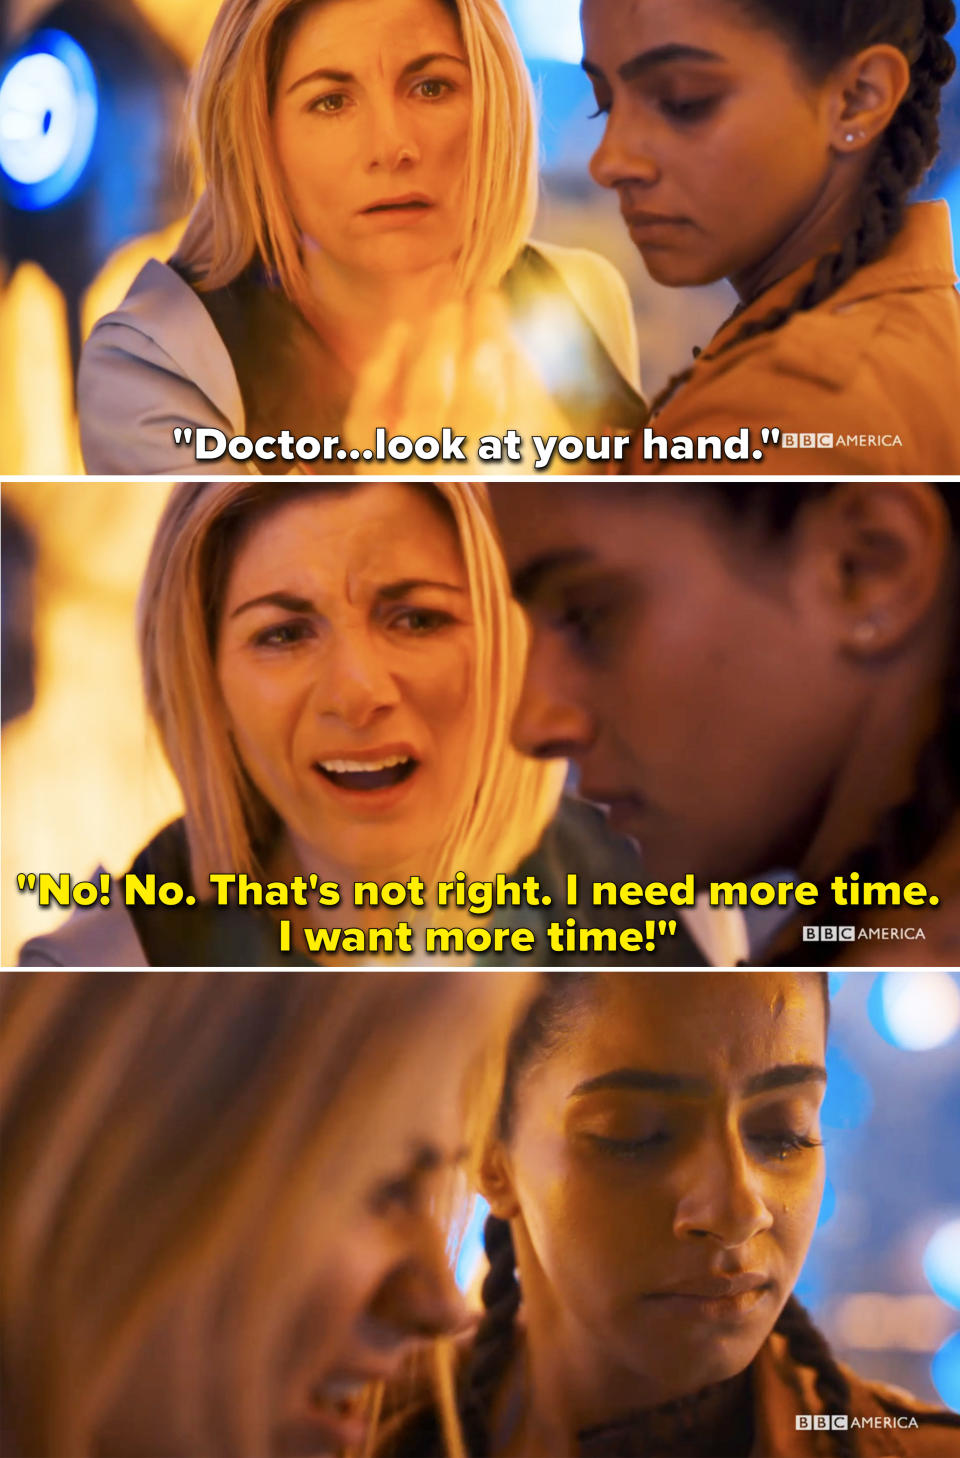 The Thirteenth Doctor being told to look at her arm, and then responding that that's not right and she needs more time